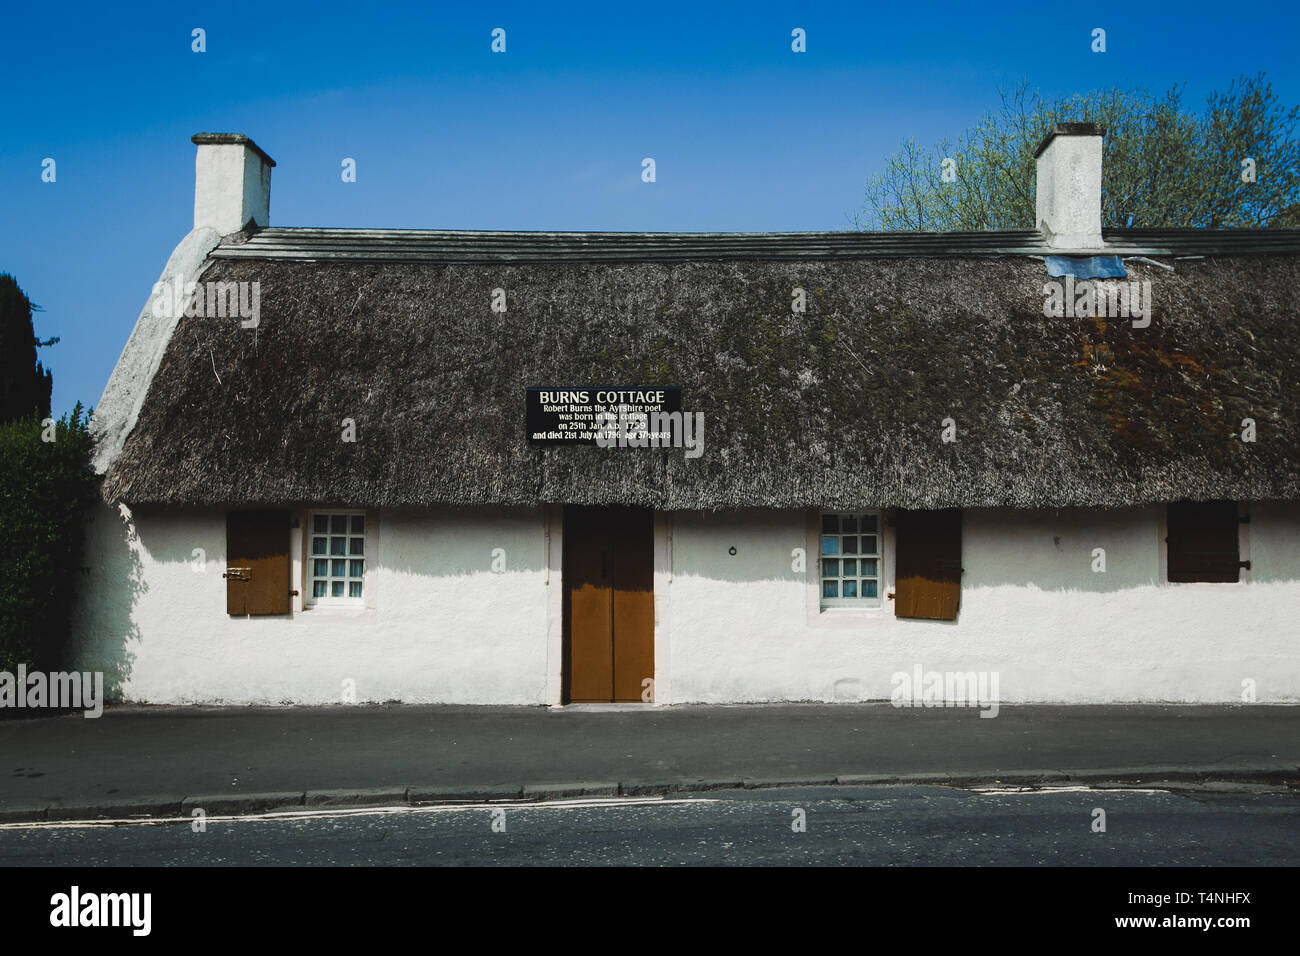 Robert Burns Birthplace Museum, Alloway, Ecosse Banque D'Images